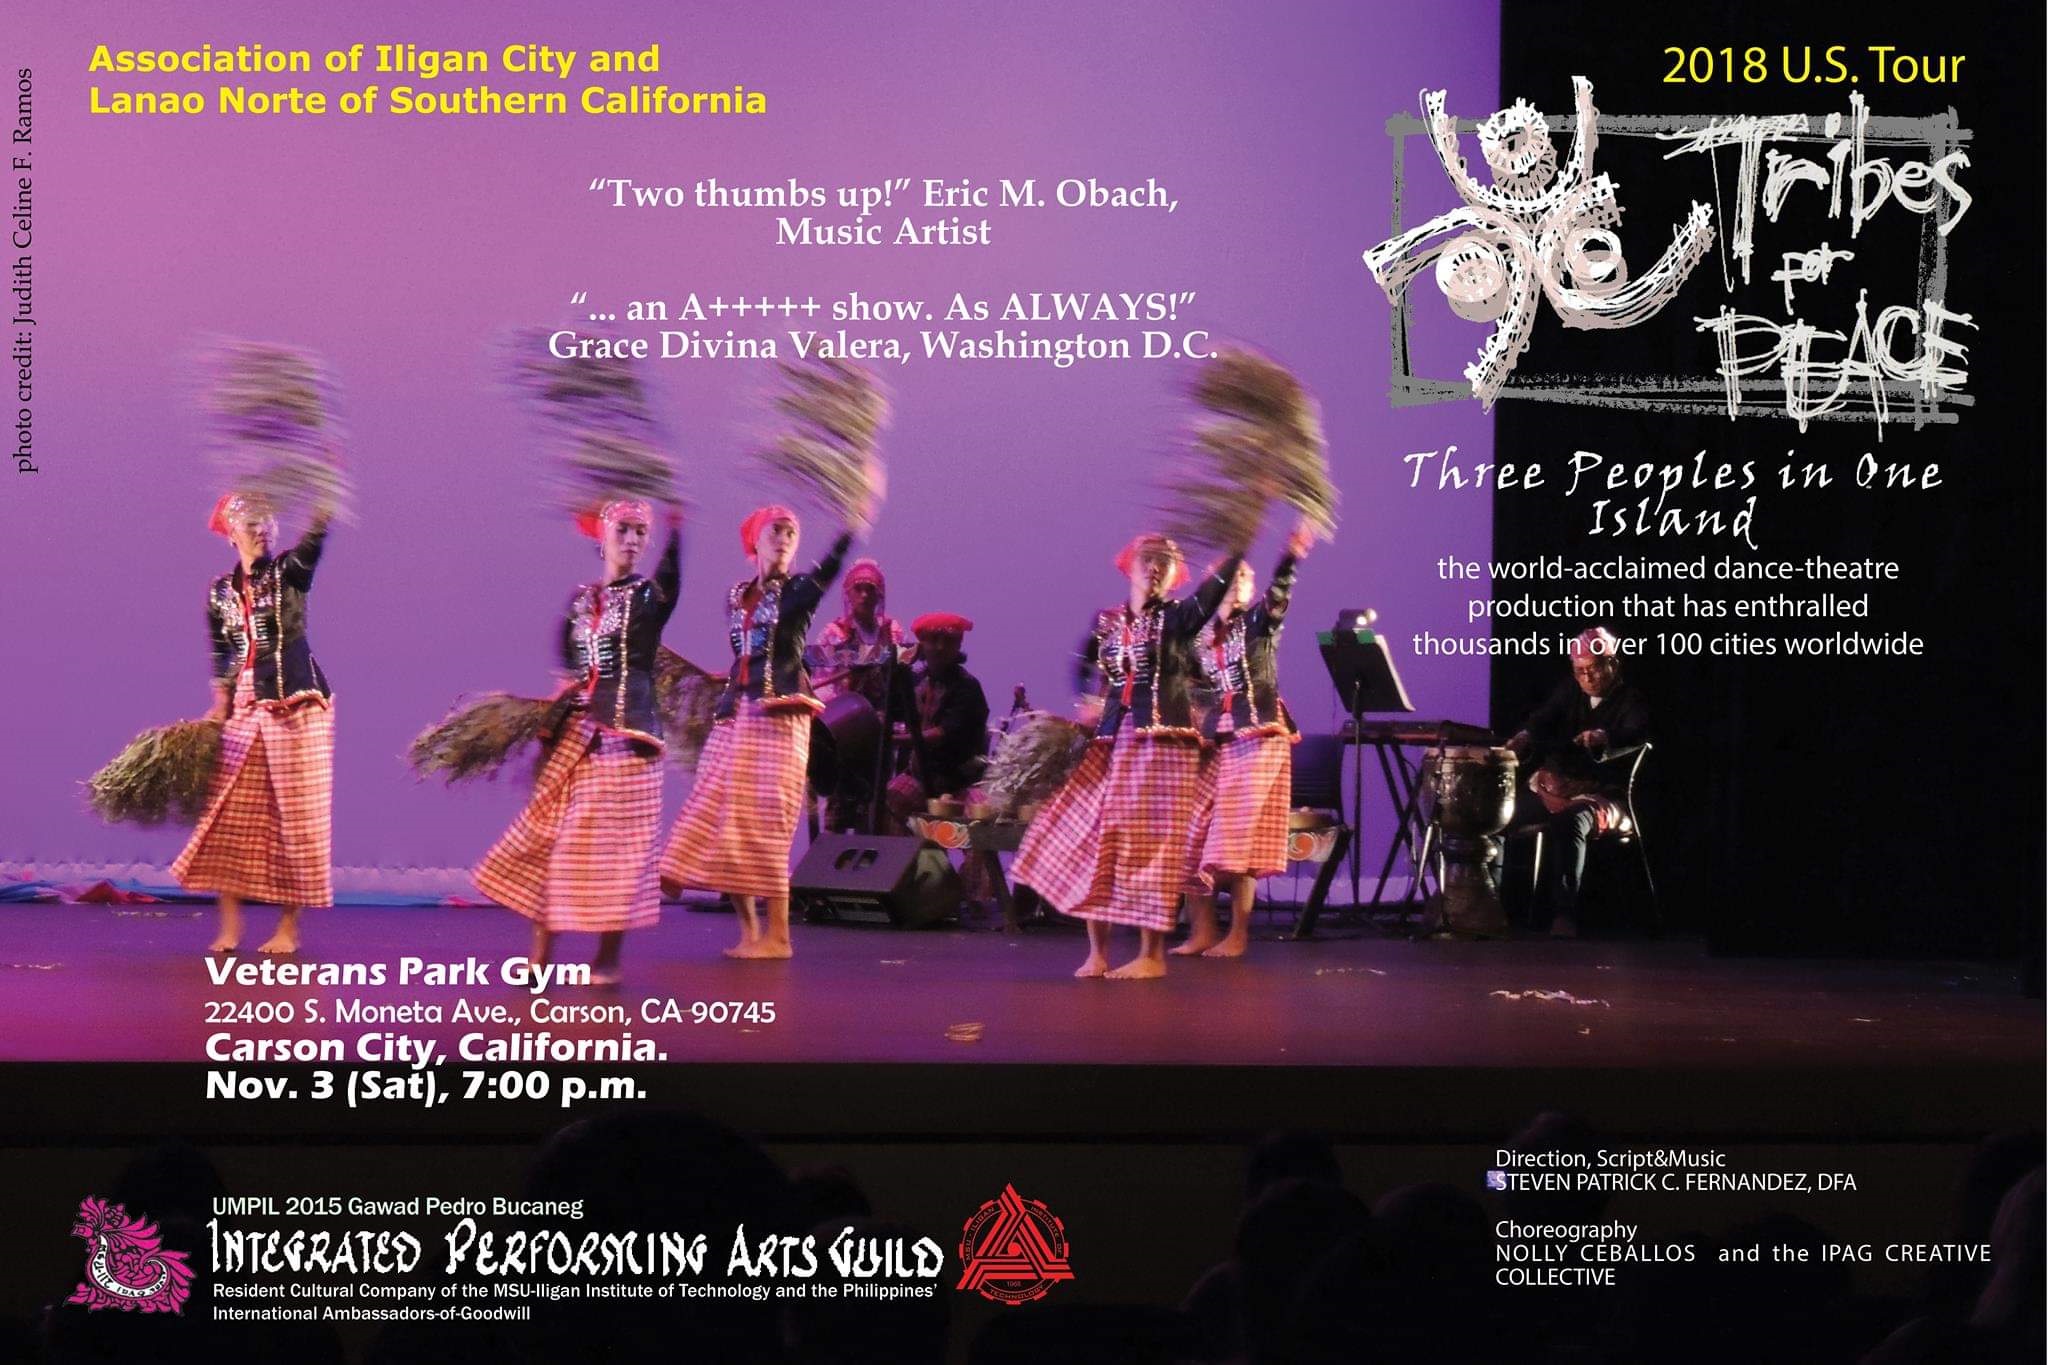 Tribes for Peace, Three Peoples in One Island: 2018 U.S. Tour of the Integrated Performing Arts Guild of Mindanao State University